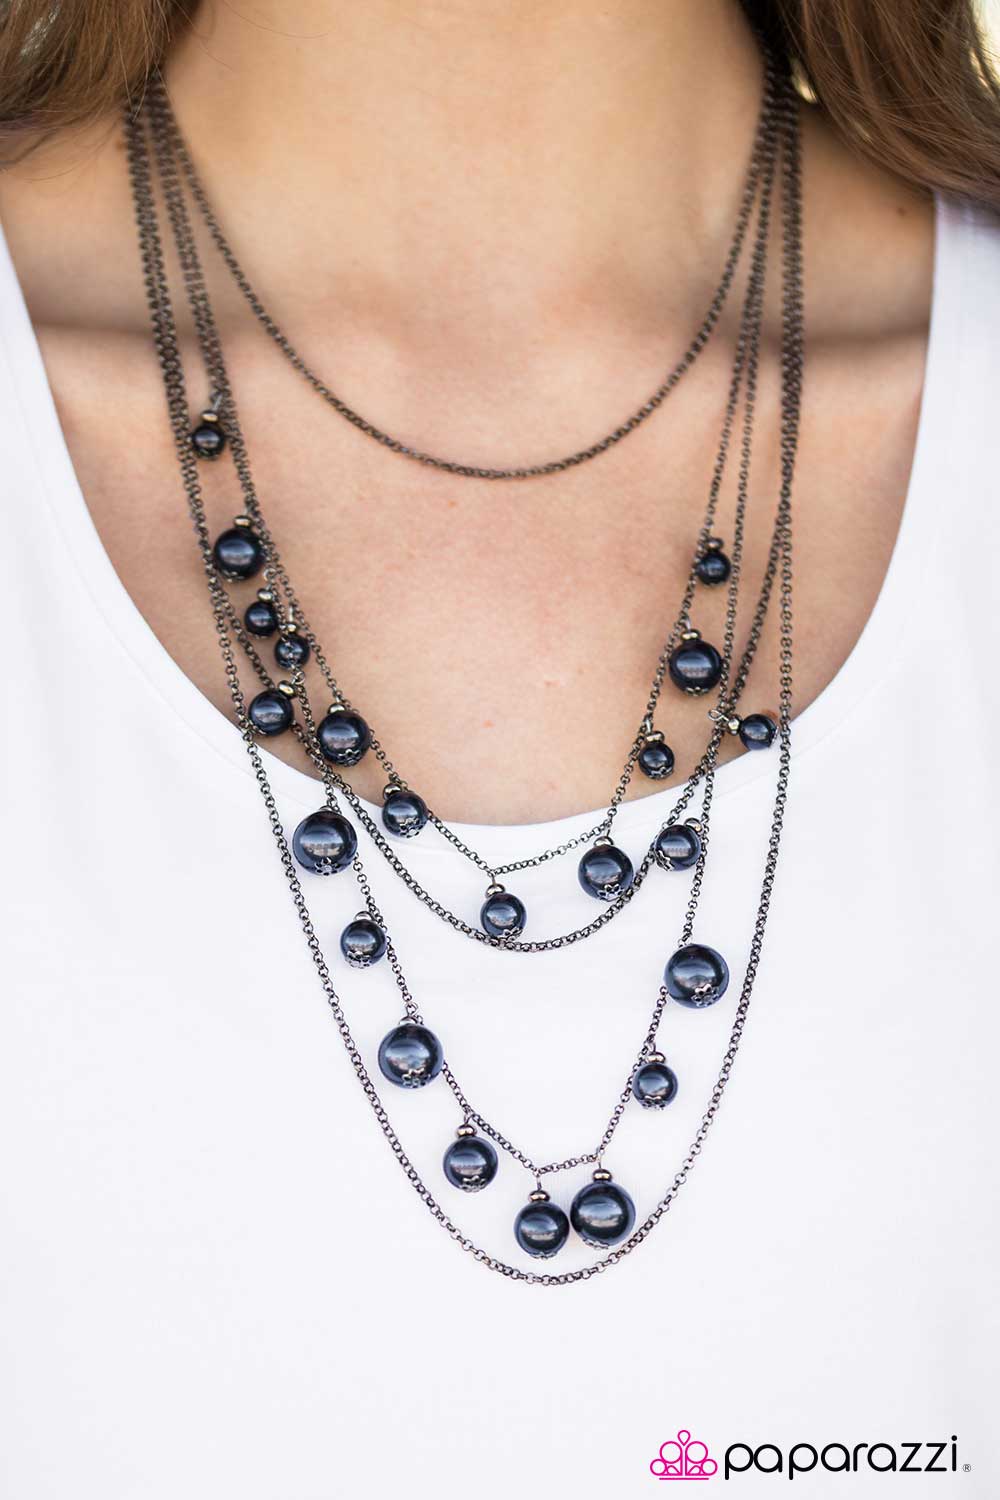 Up Close and Personal - Blue - Paparazzi necklace